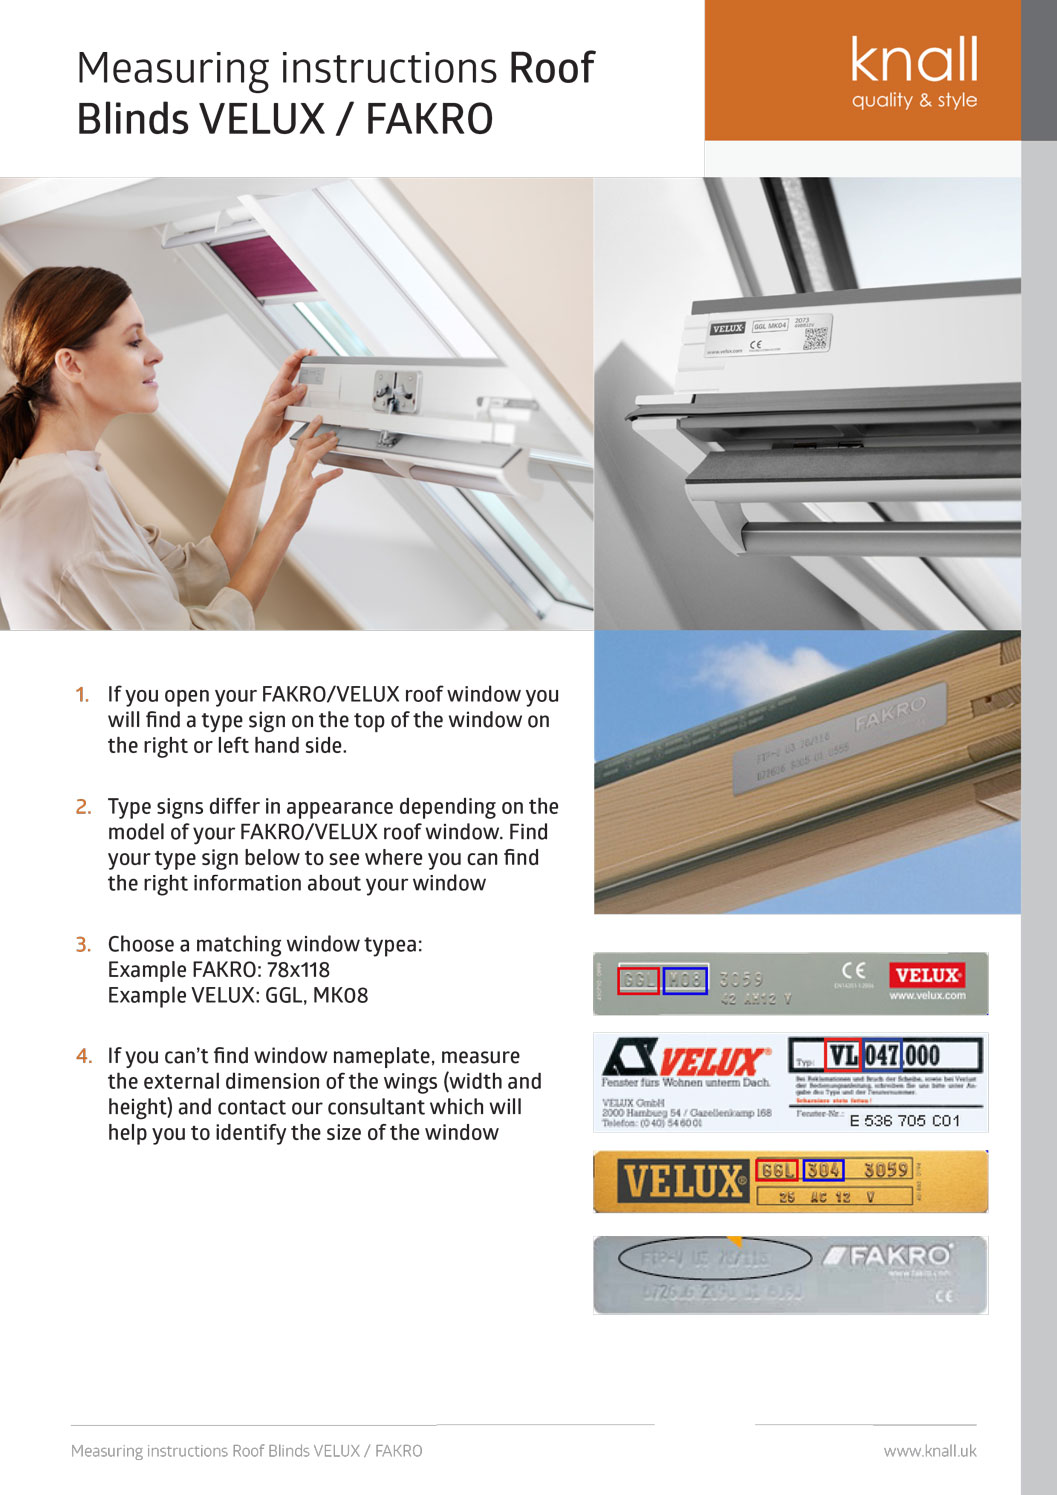 Fakro and Velux blinds measuring